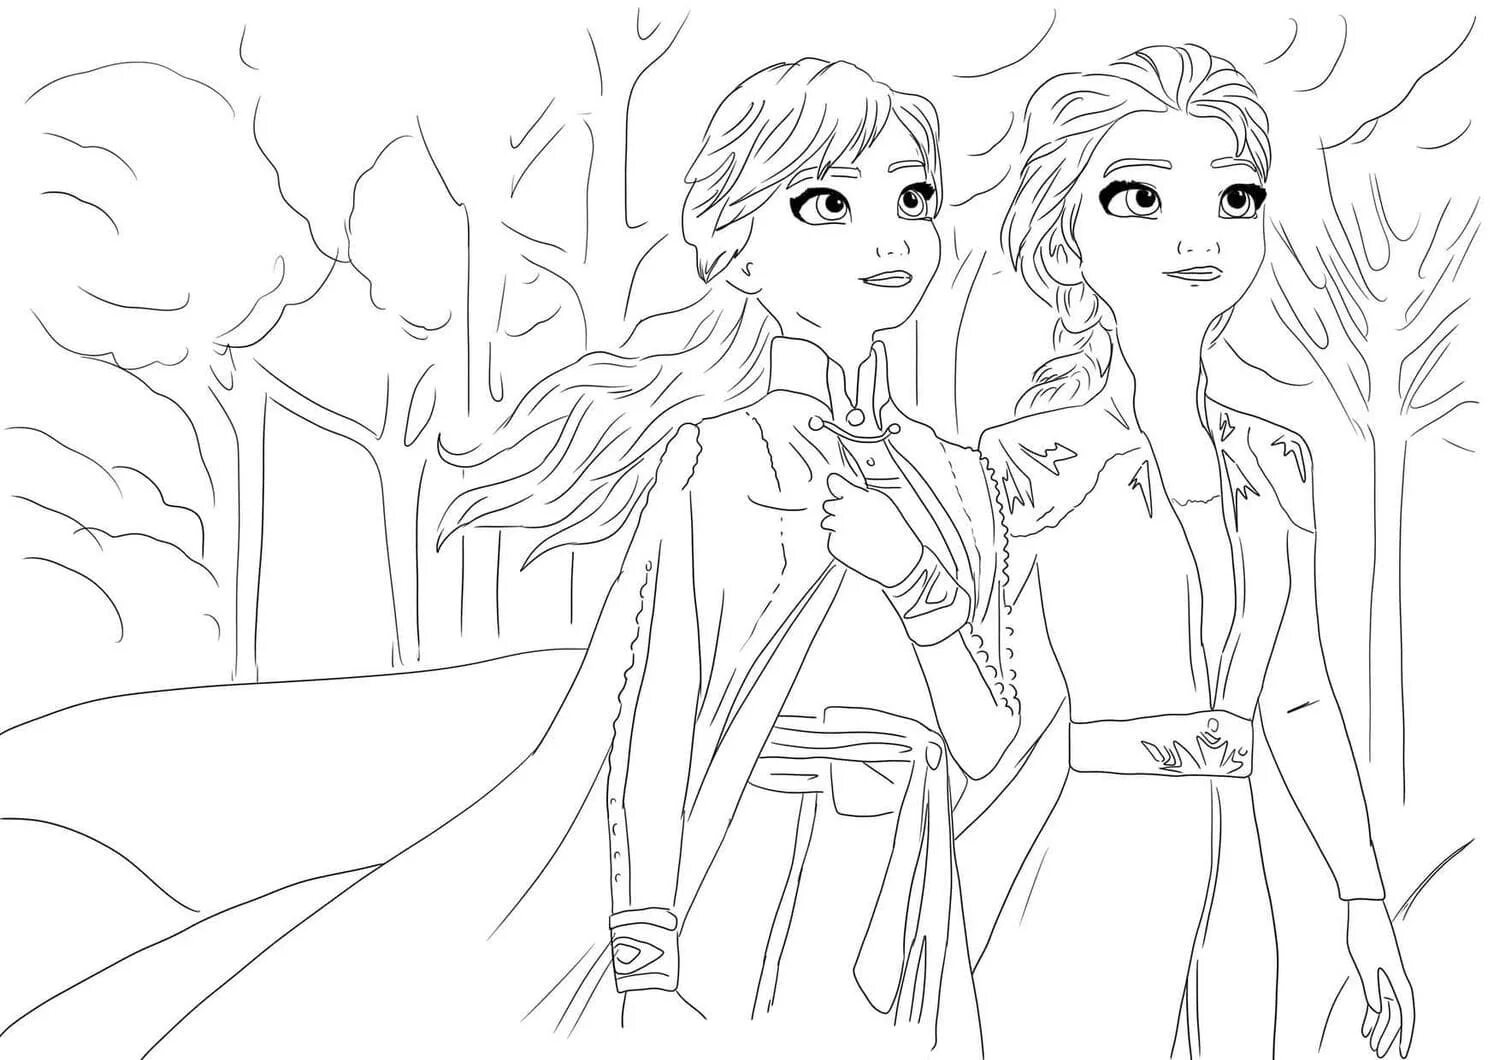 Elsa and anna in good quality #8